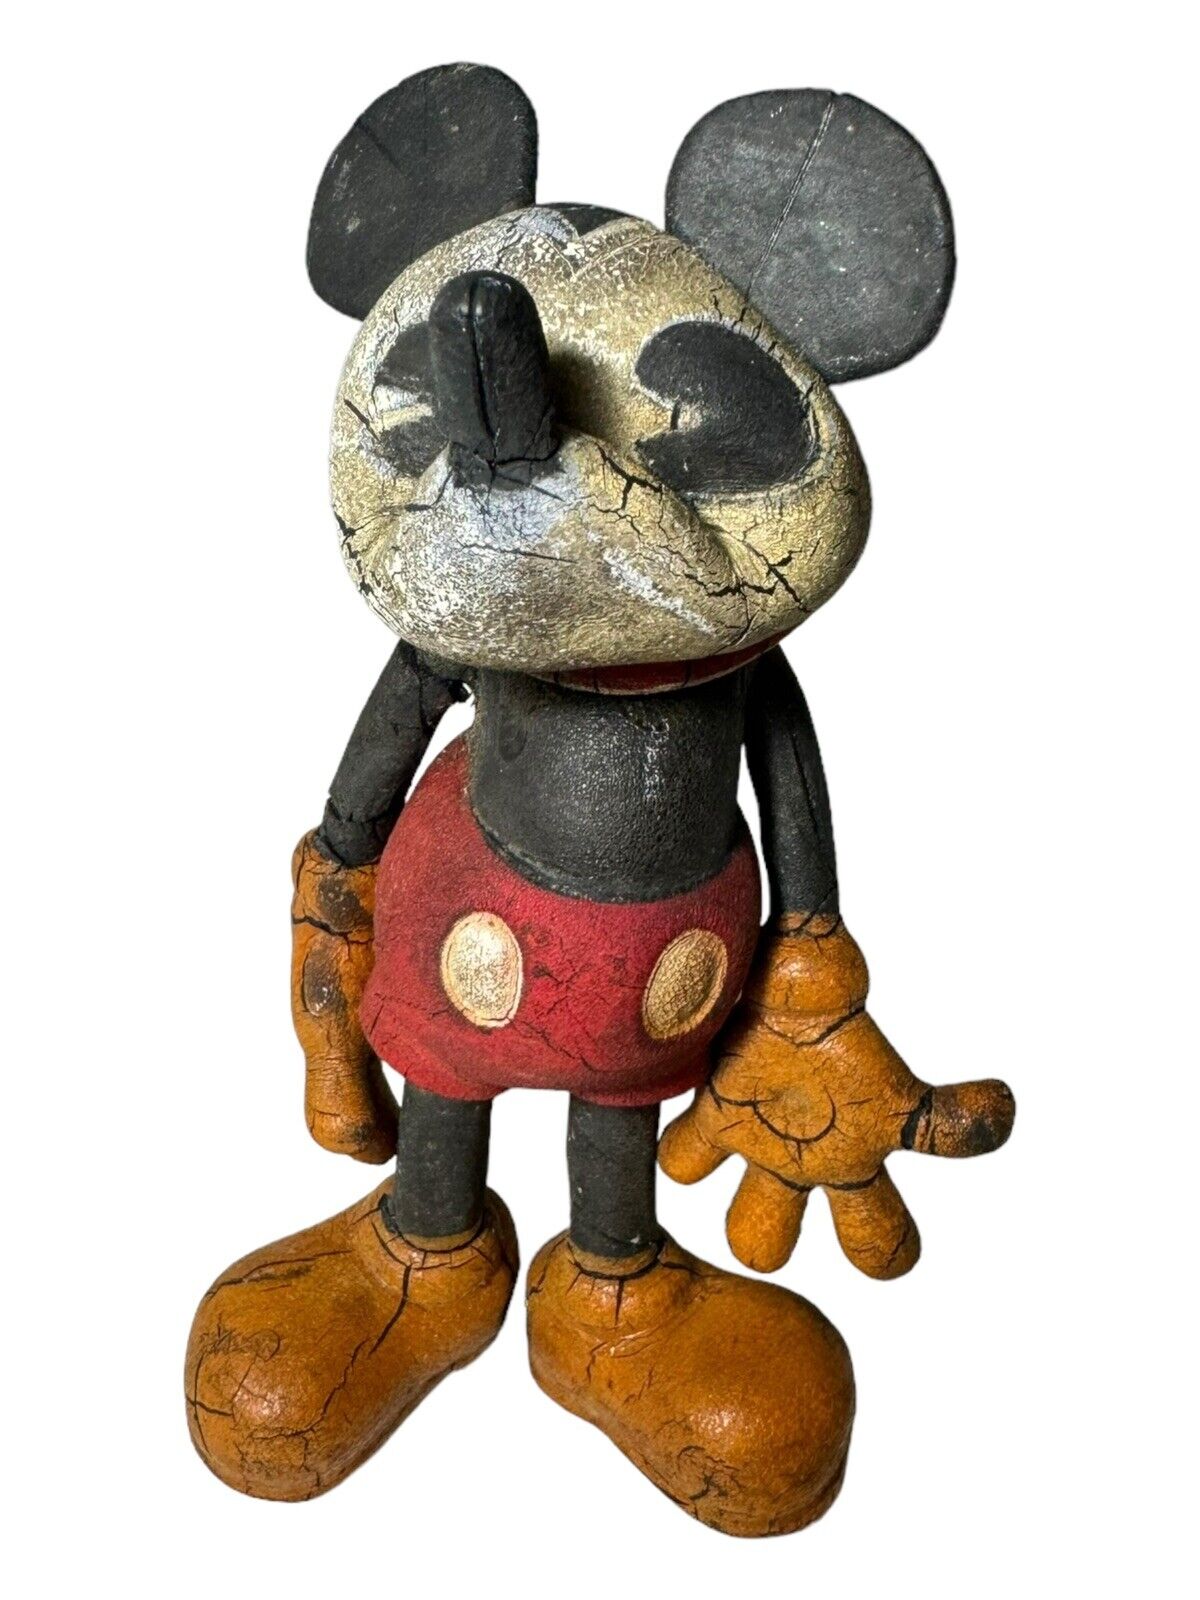 1930's Sieberling Rubber Mickey Mouse Pie-eyed Figure Toy Disney